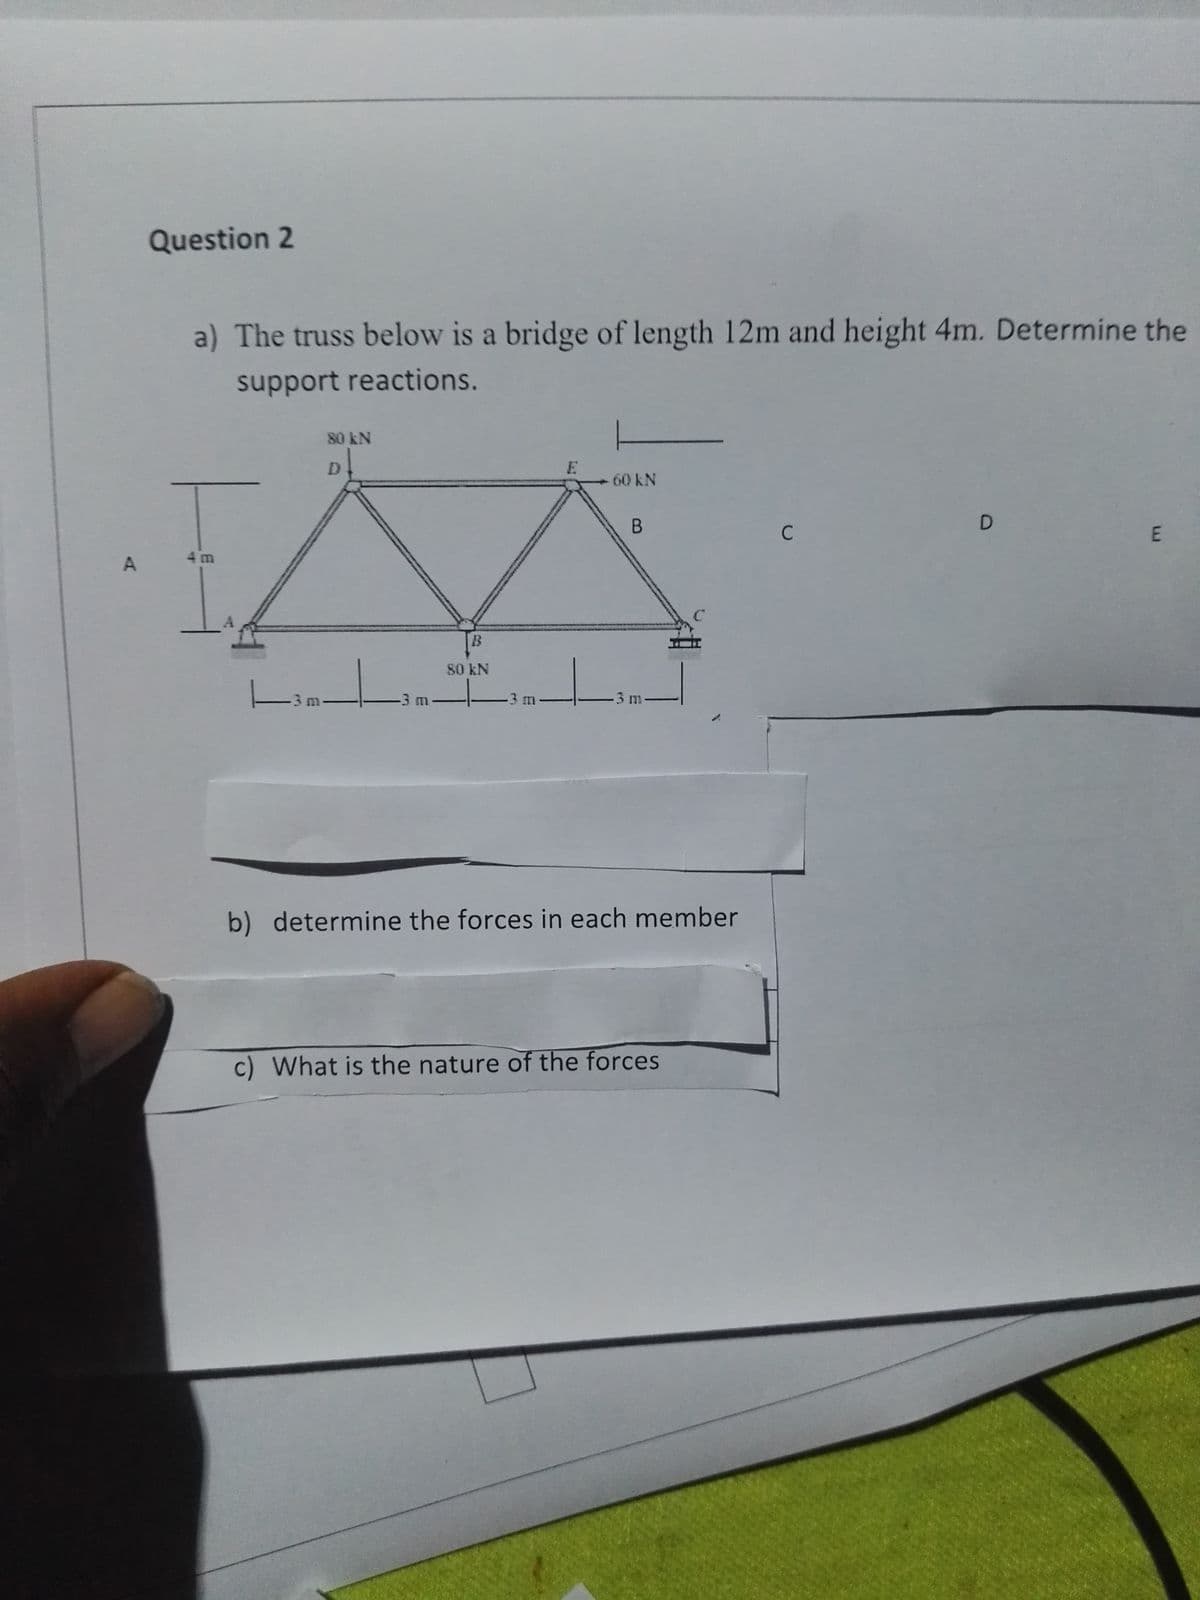 A
Question 2
a) The truss below is a bridge of length 12m and height 4m. Determine the
support reactions.
|3m
80 kN
D
-3 m
B
80 kN
-3 m-
E
L
60 kN
B
-3 m-
b) determine the forces in each member
c) What is the nature of the forces
C
D
E